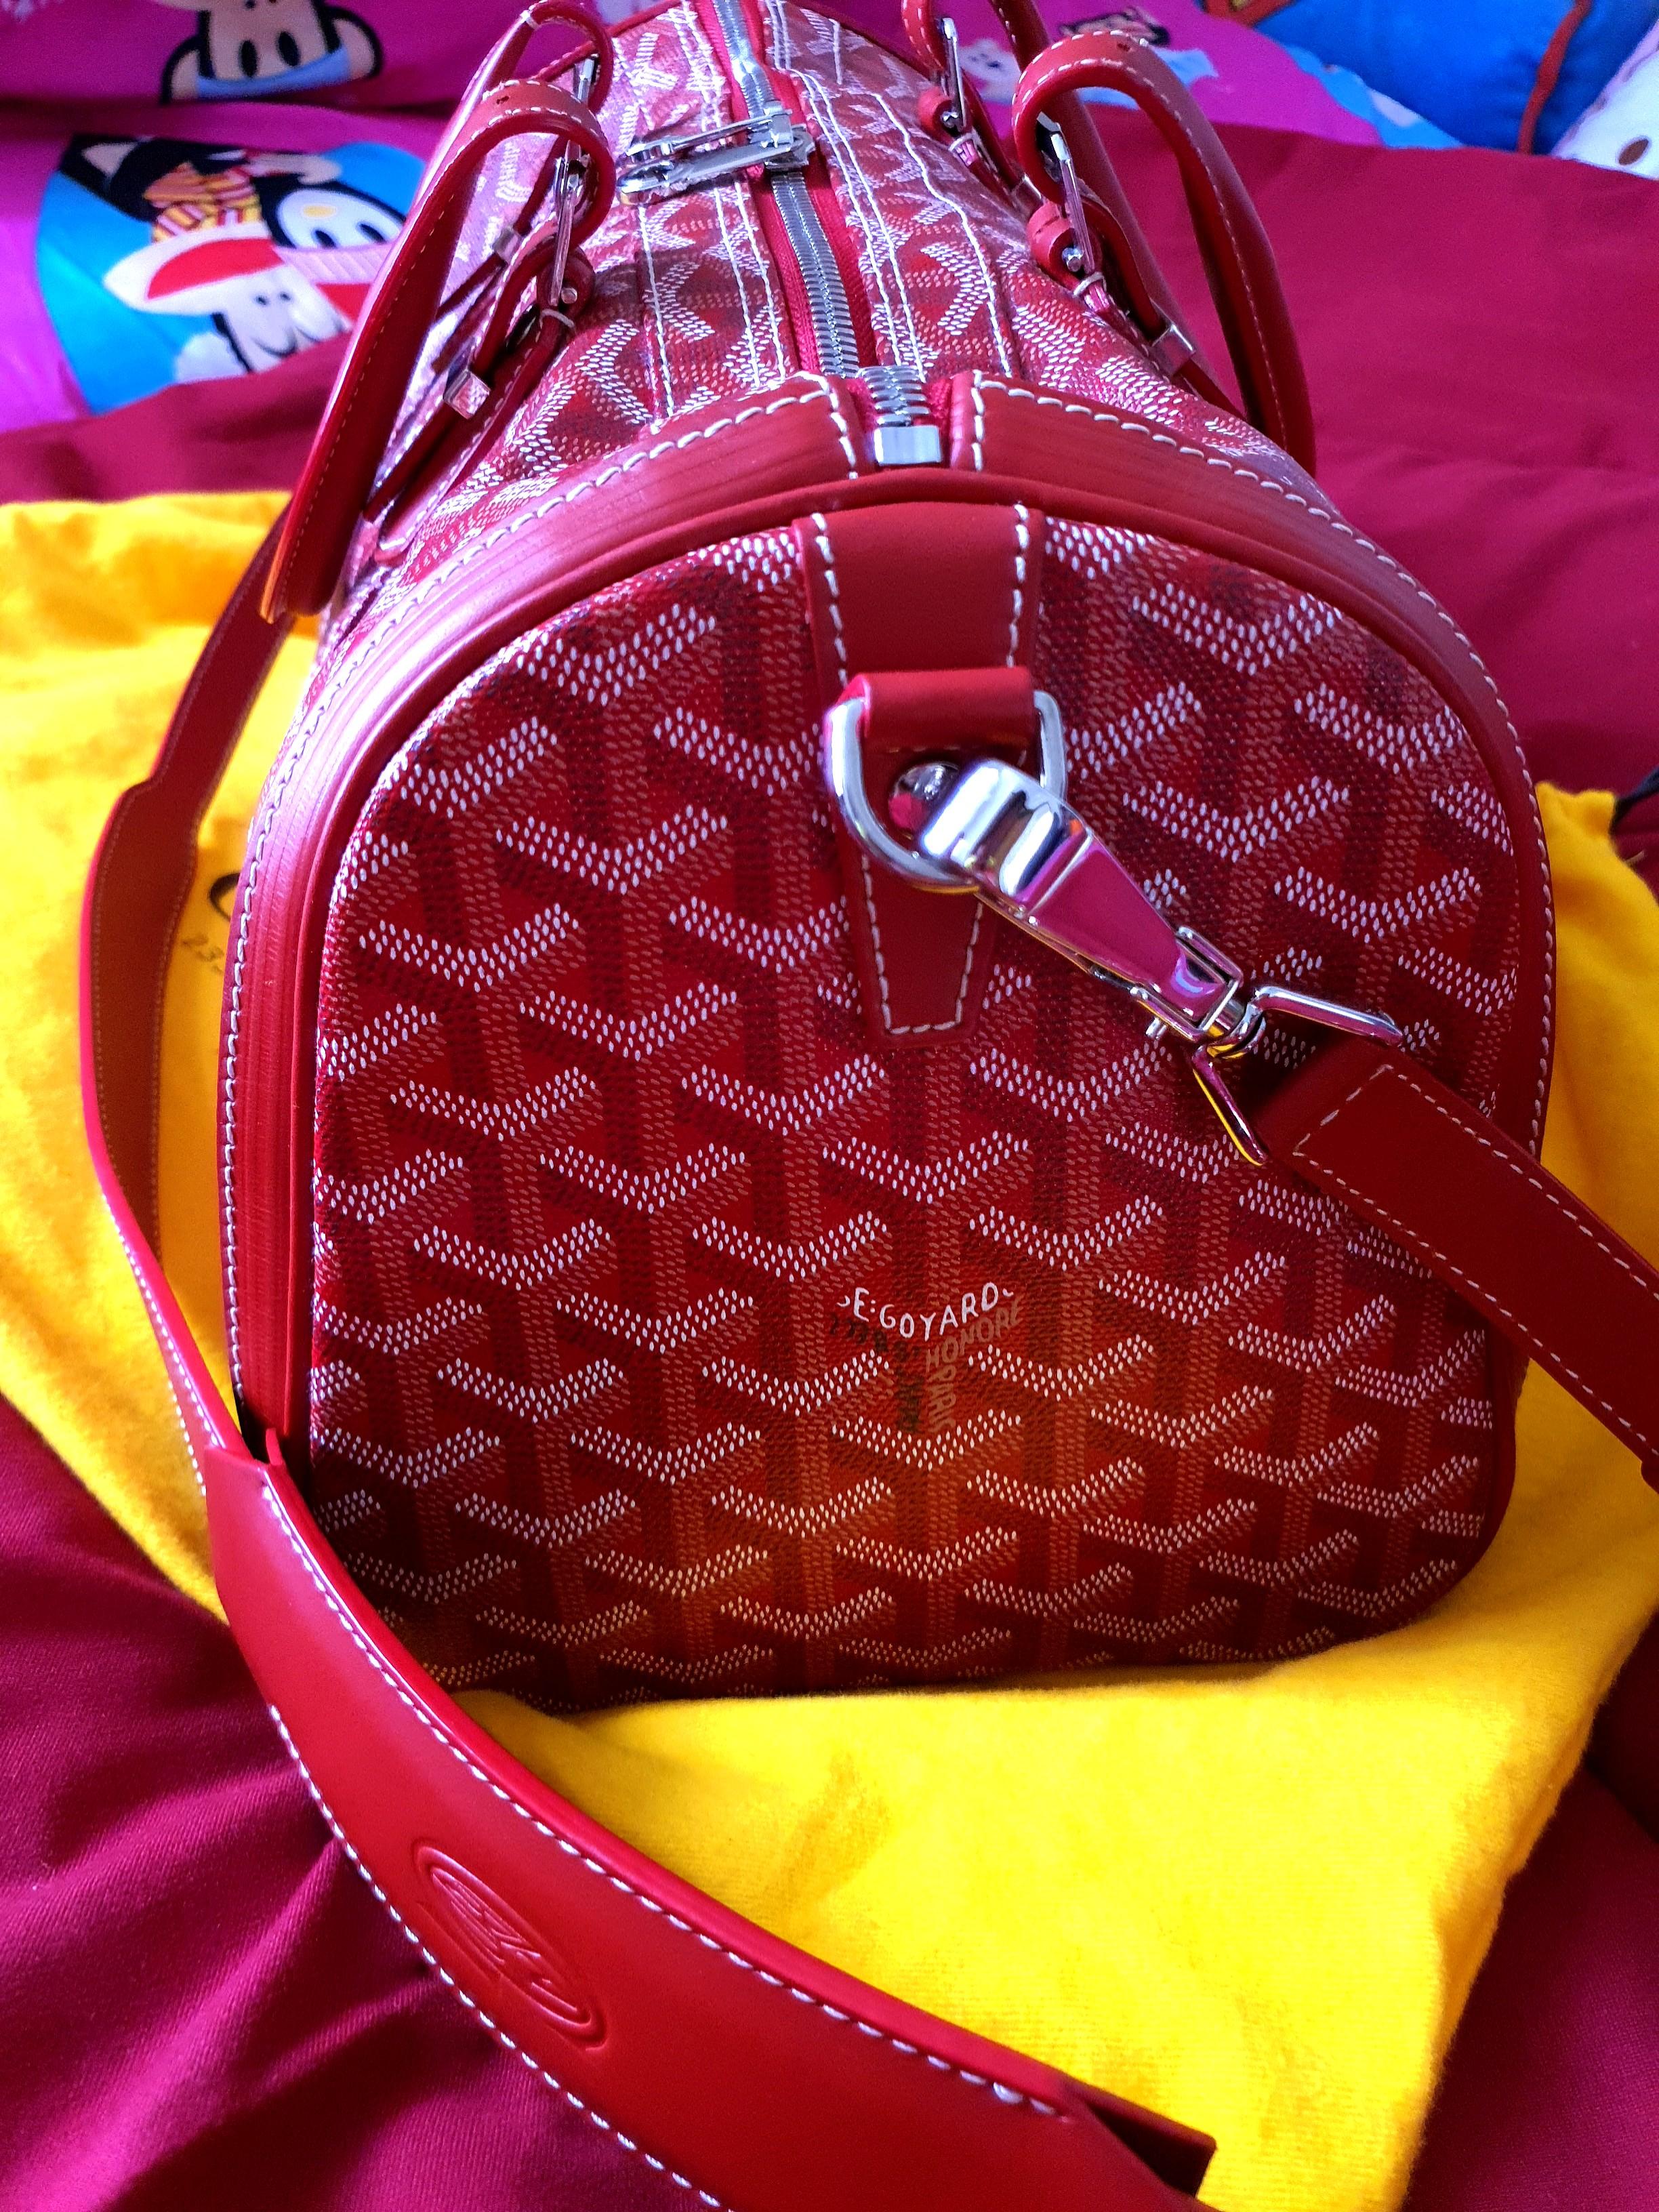 Goyard Red Croisiere 35 Duffle Bag With Leather Strap., Luxury